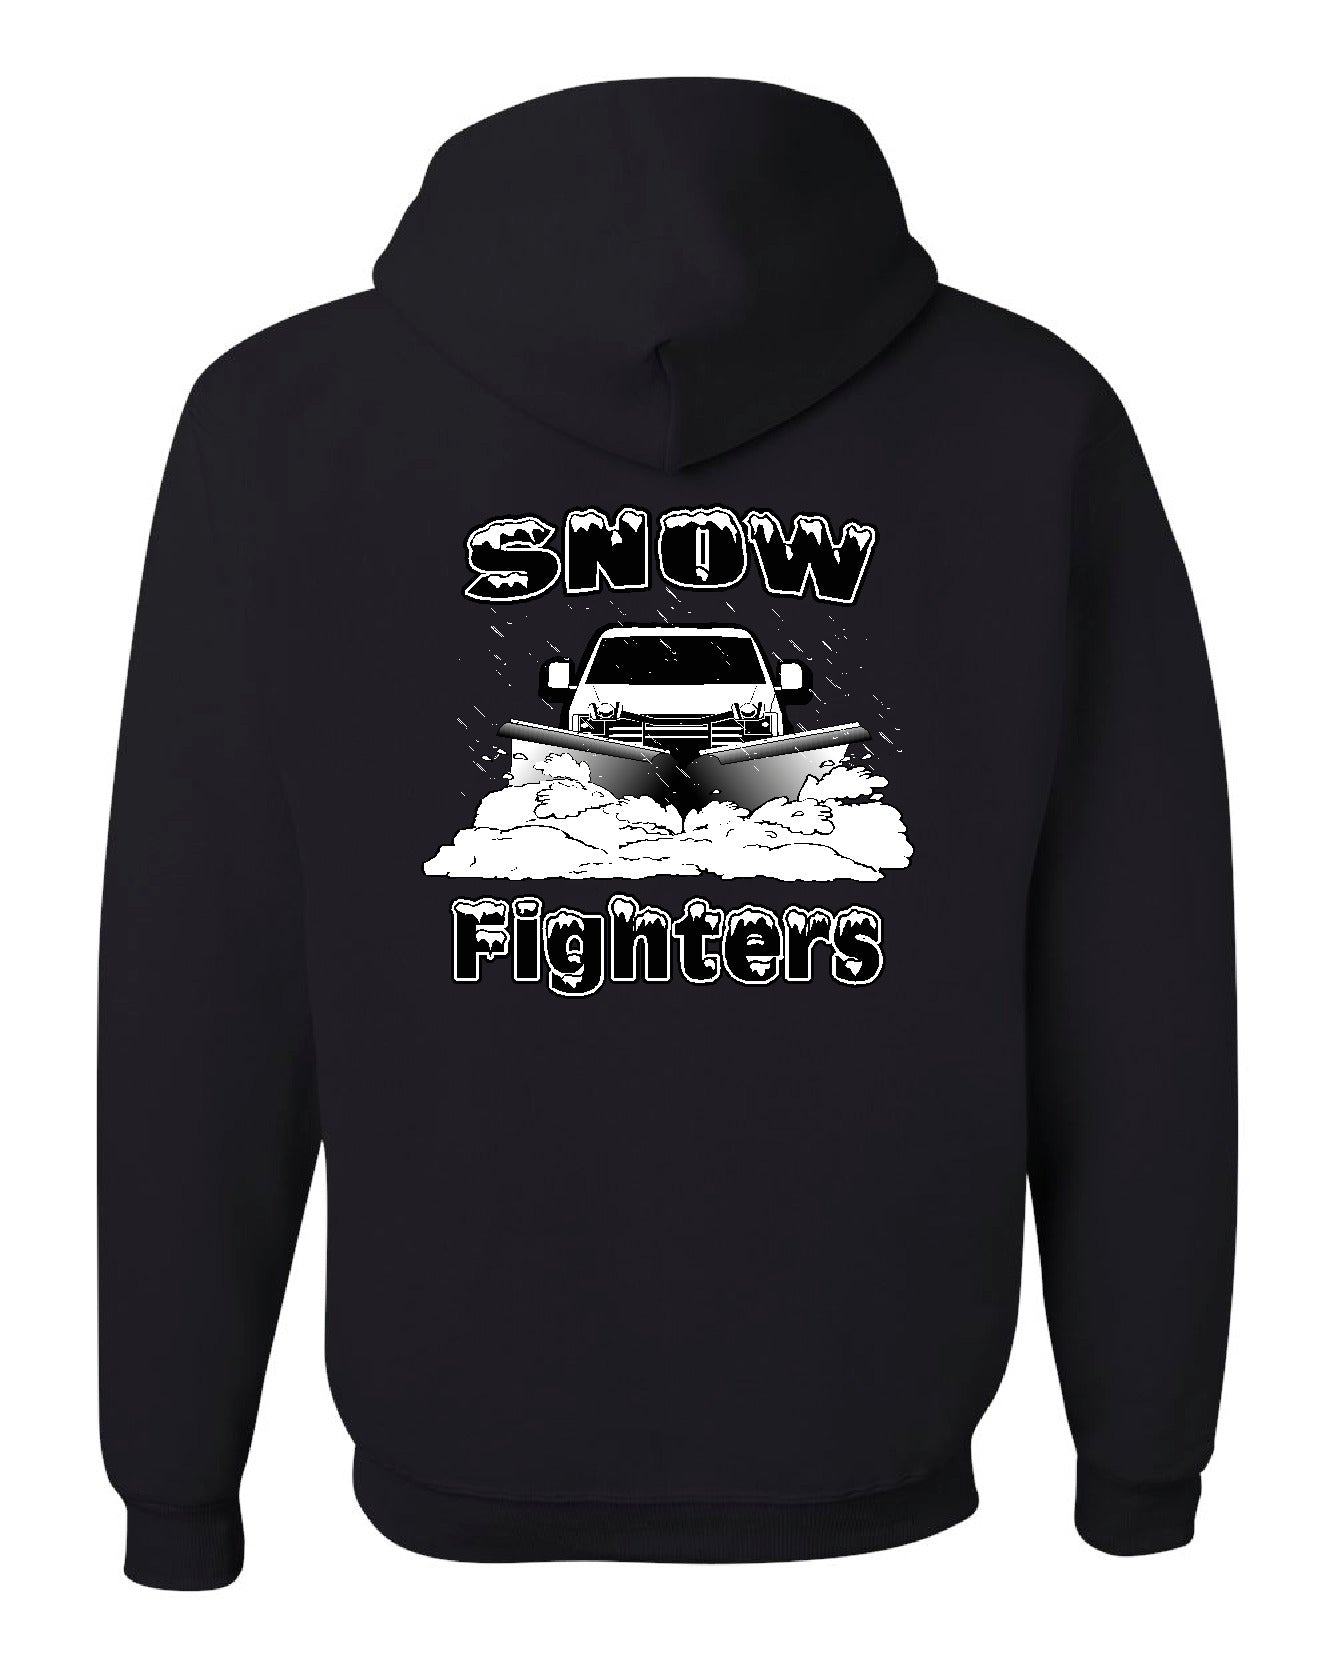 Snow Fighters Pickup Truck